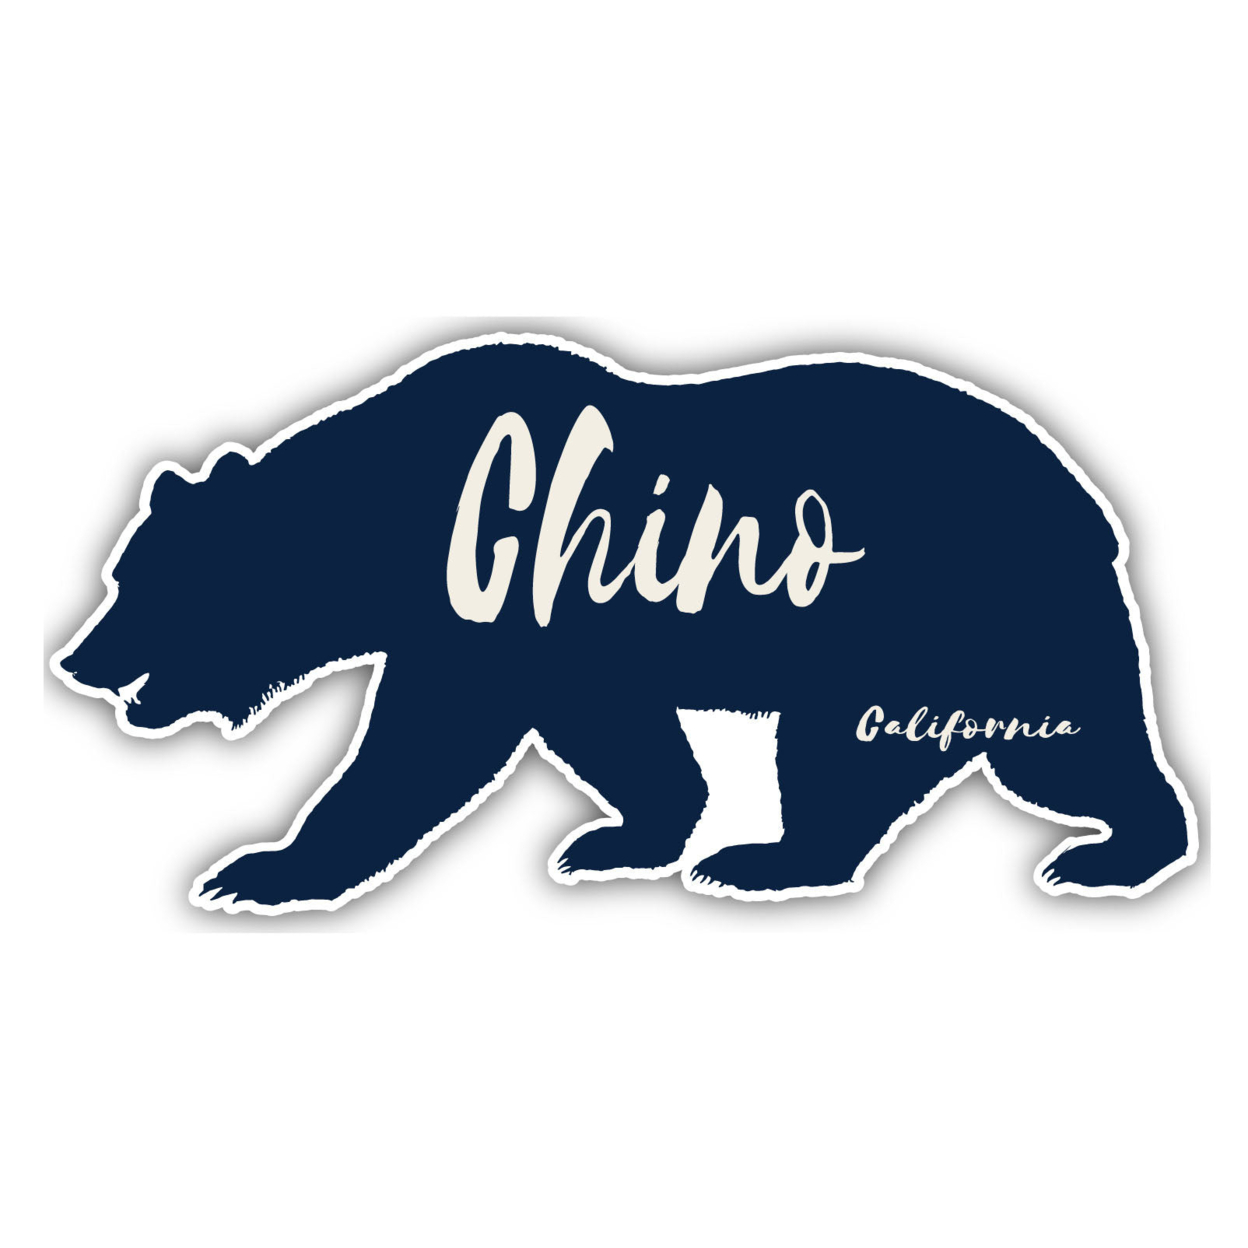 Chino California Souvenir Decorative Stickers (Choose Theme And Size) - 4-Pack, 8-Inch, Bear